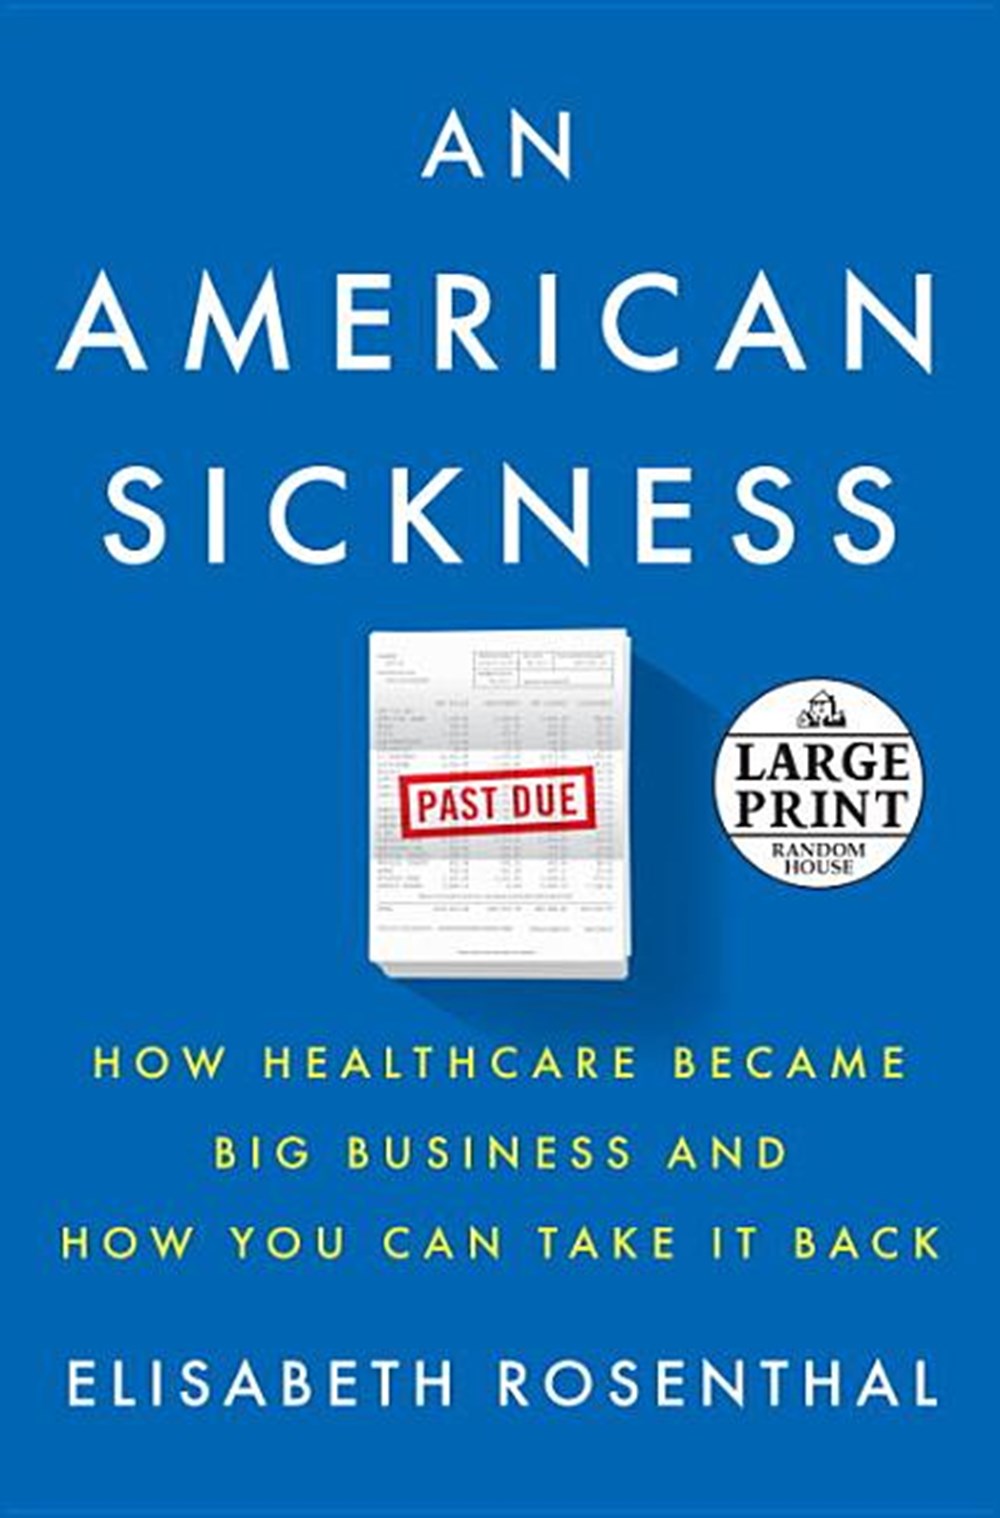 American Sickness: How Healthcare Became Big Business and How You Can Take It Back